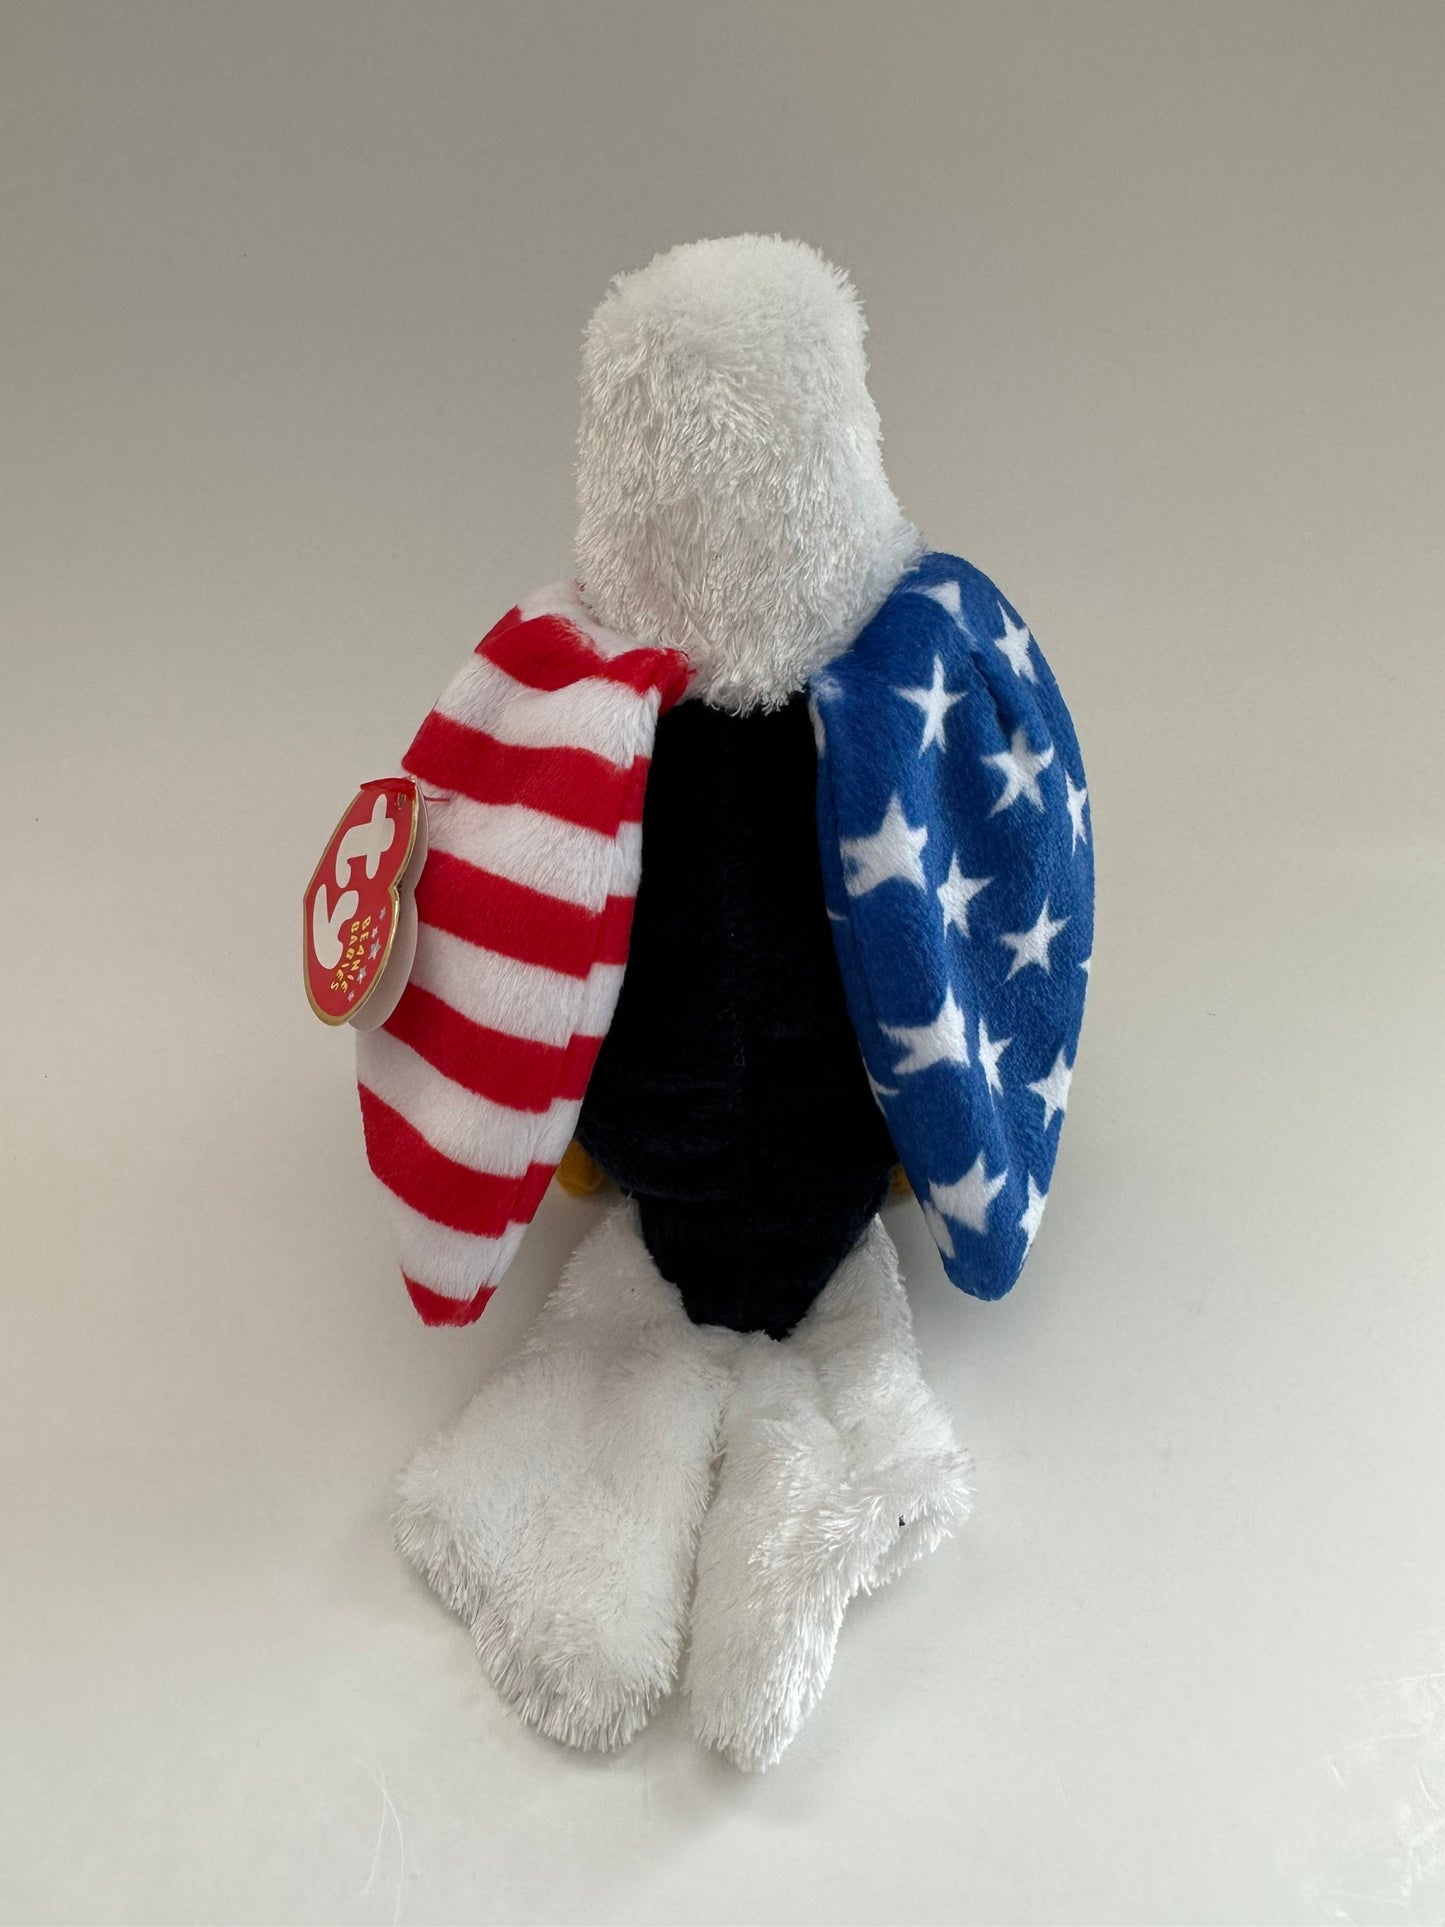 Ty Beanie Baby “Soar” the USA Patriotic Eagle - Internet Exclusive (6 inch)